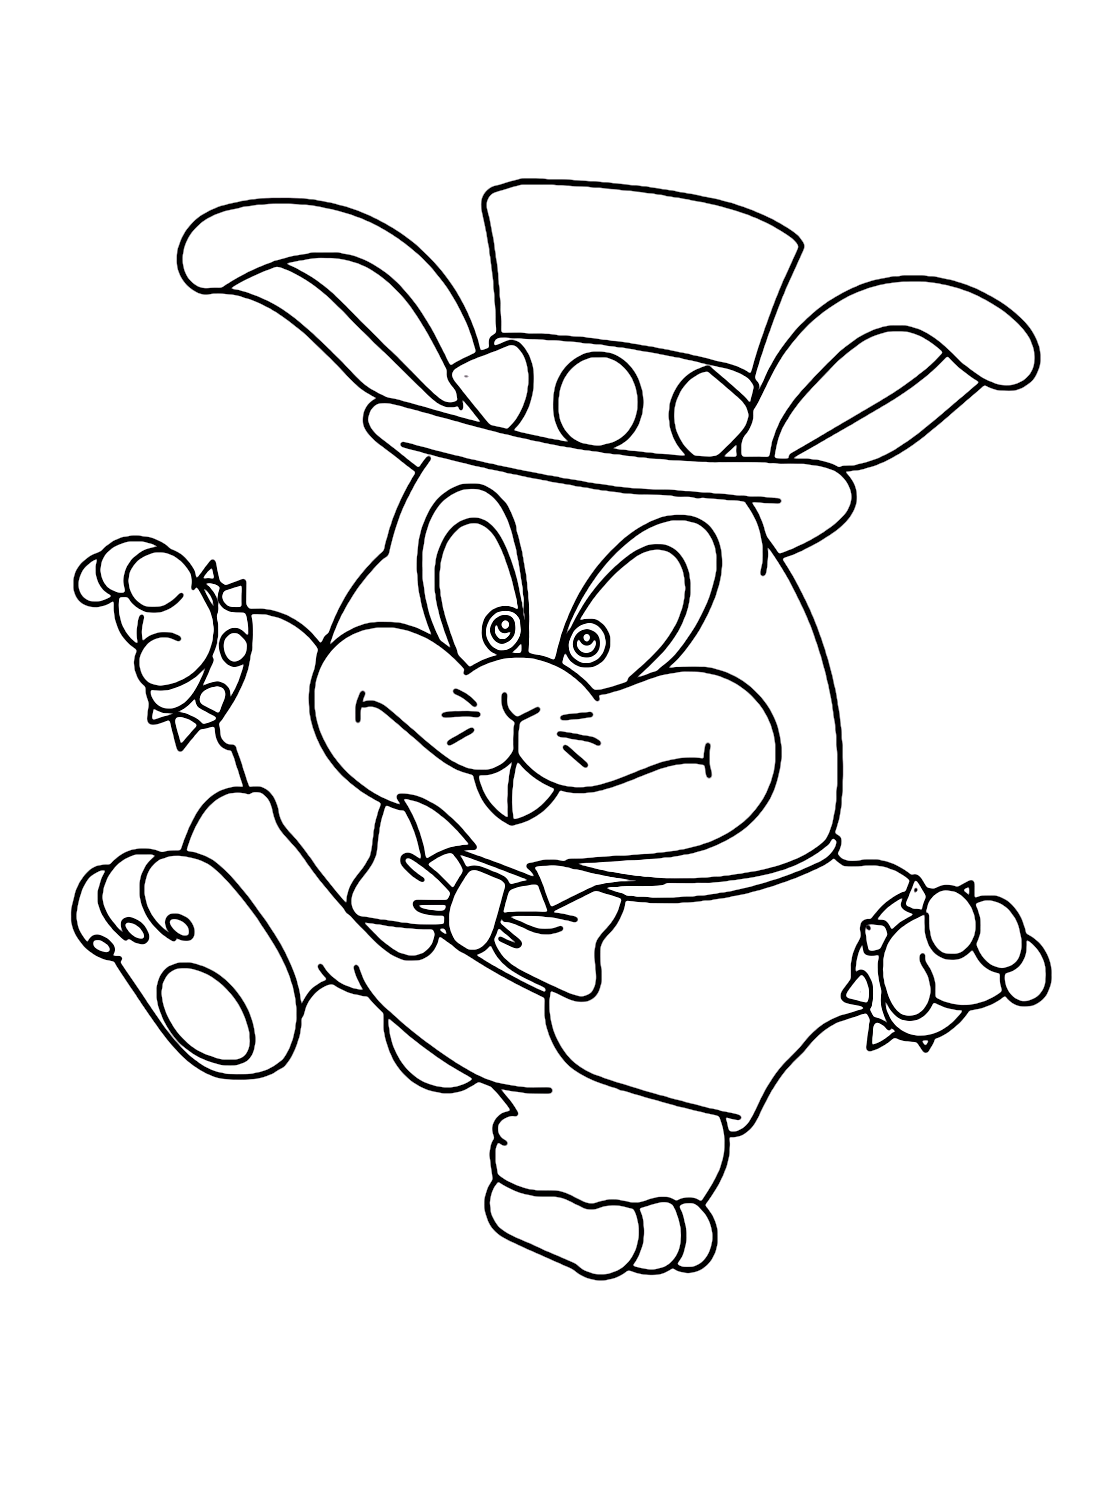 Topper from Super Mario Odyssey Coloring Pages